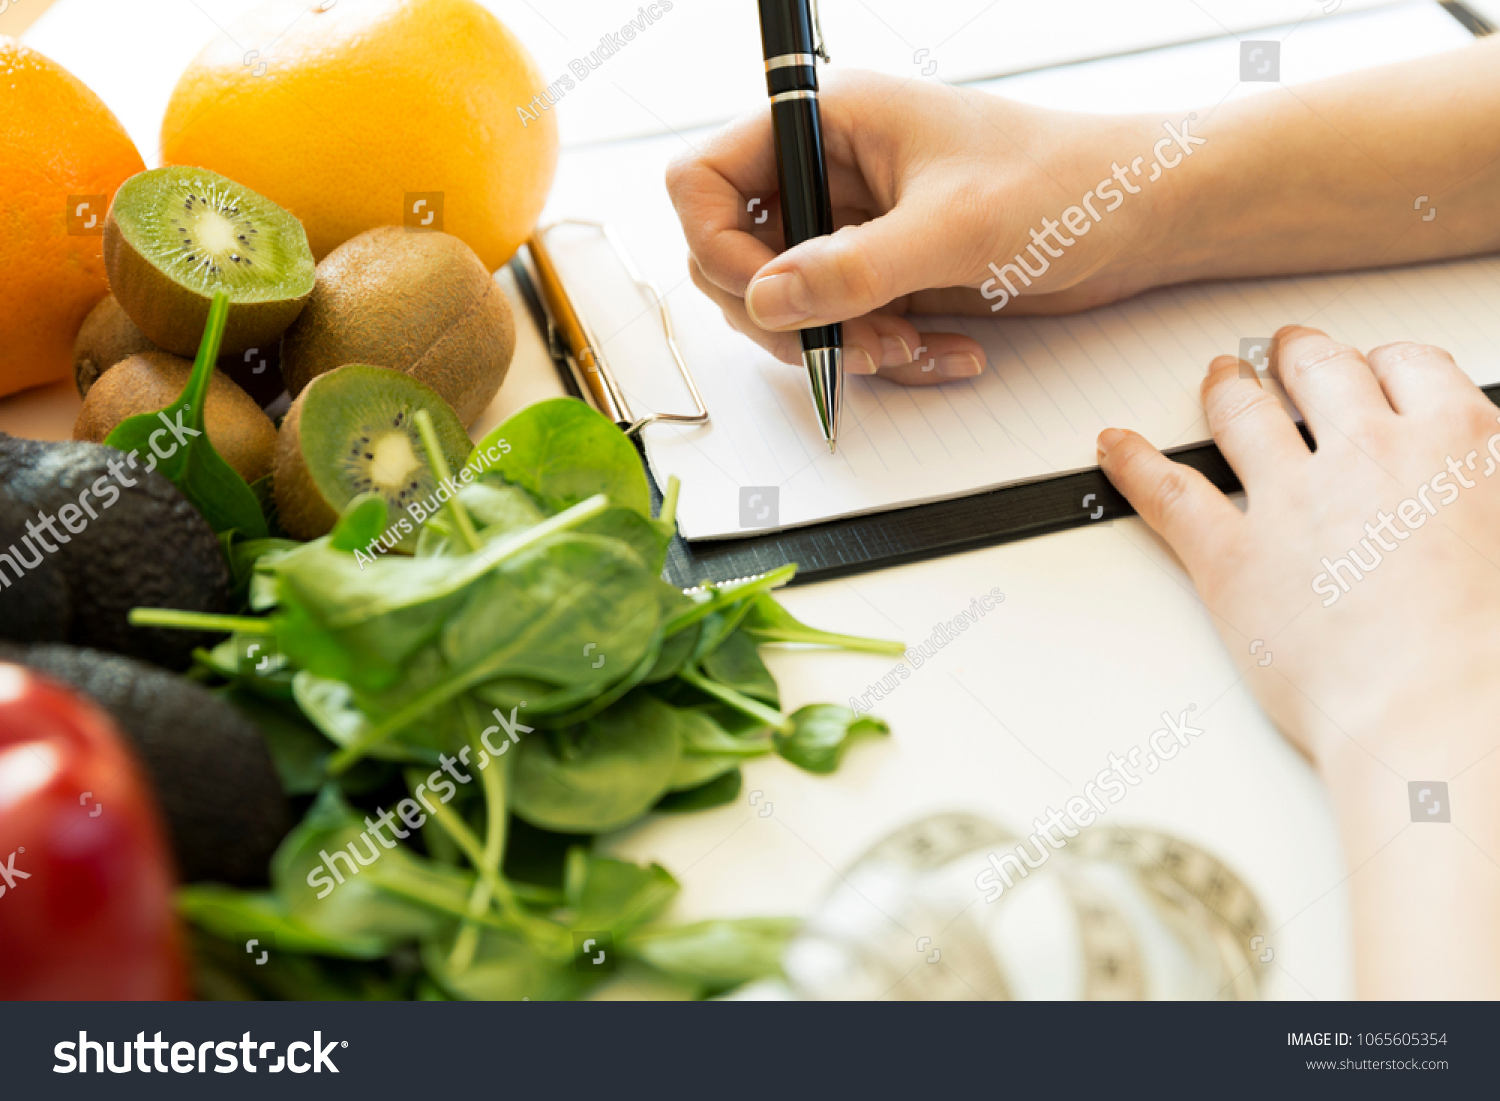 Nutritionist woman writing diet plan on table full of fruits and vegetables #1065605354